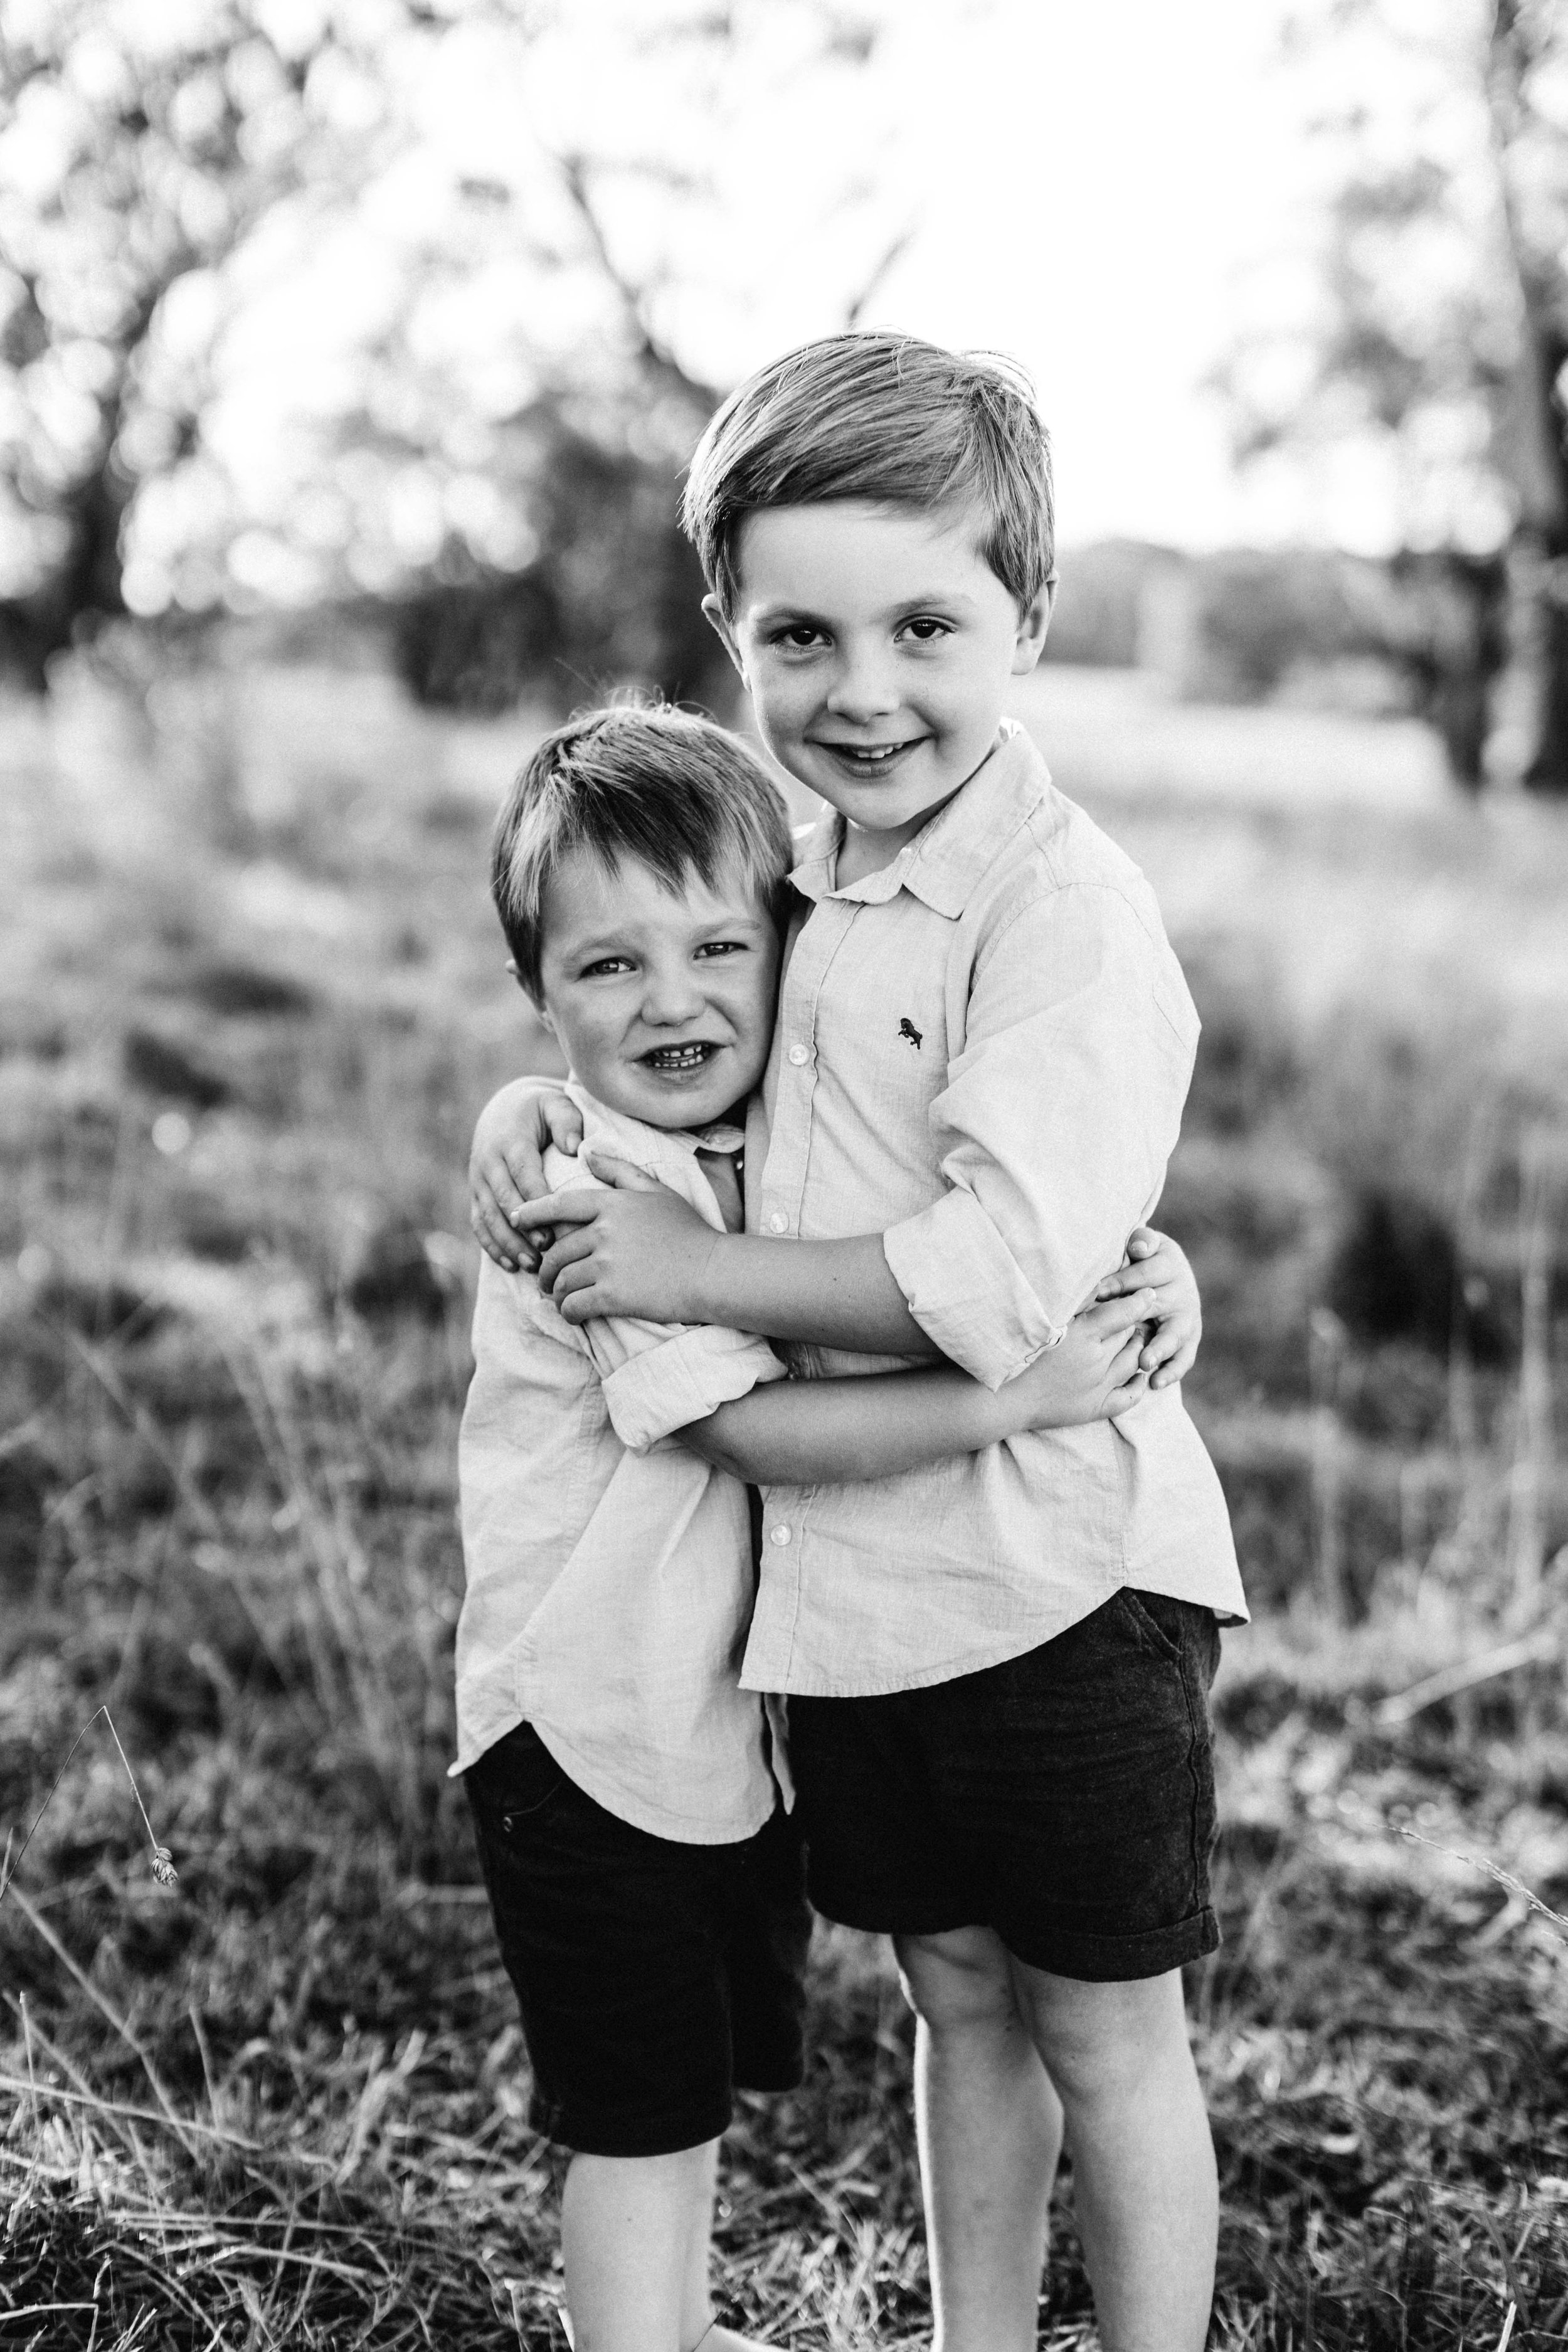 durney-family-exeter-southern-highlands-bowral-inhome-family-lifestyle-wollondilly-camden-macarthur-sydney-photography-www.emilyobrienphotography.net-45.jpg